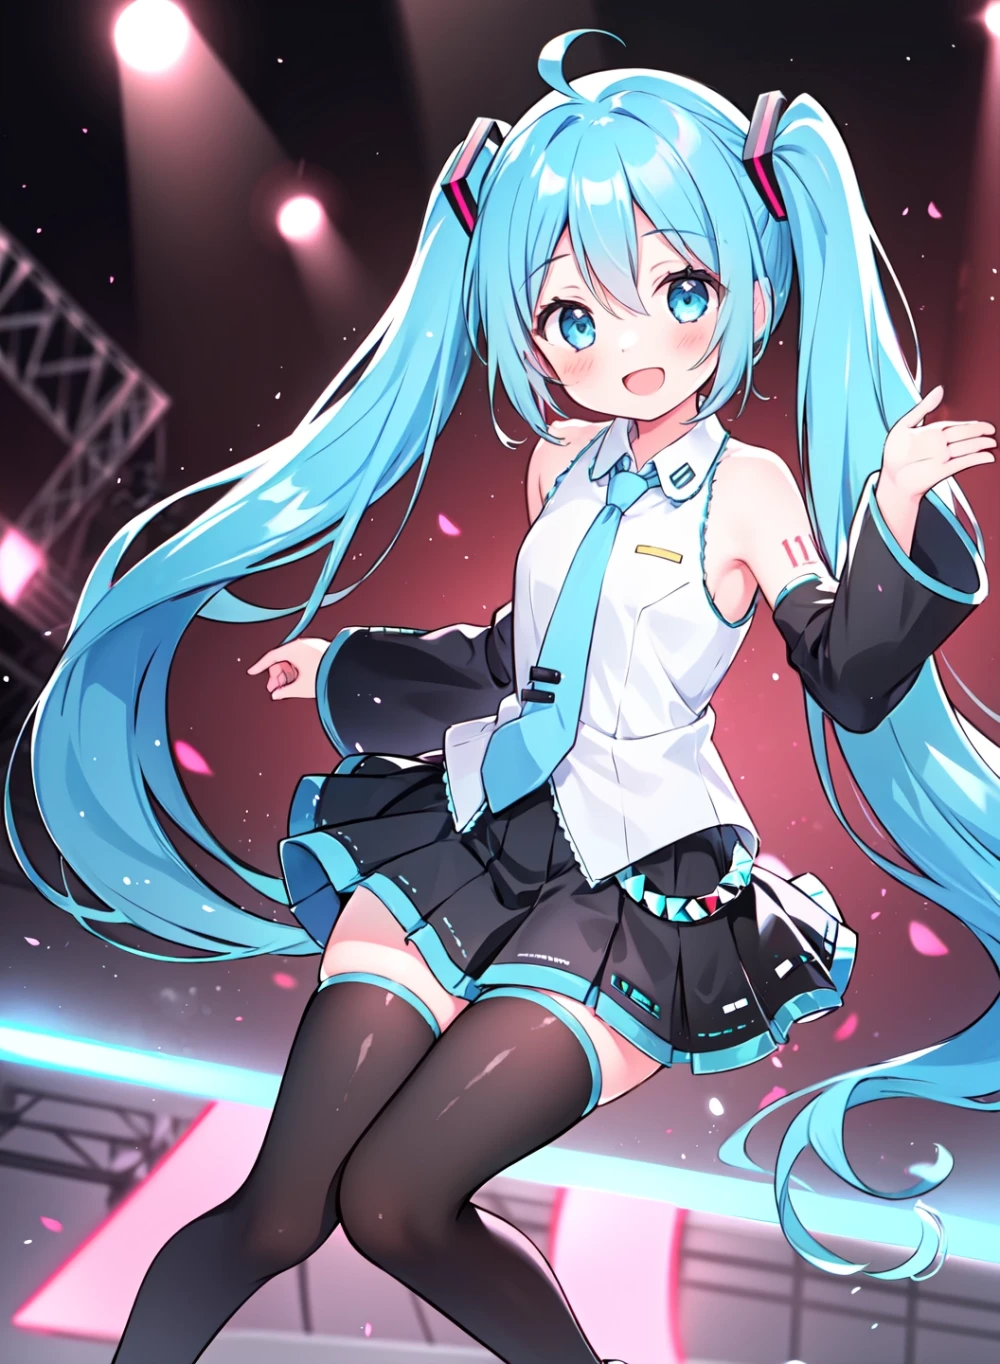 hatsune-miku-anime-style-all-ages-2-36